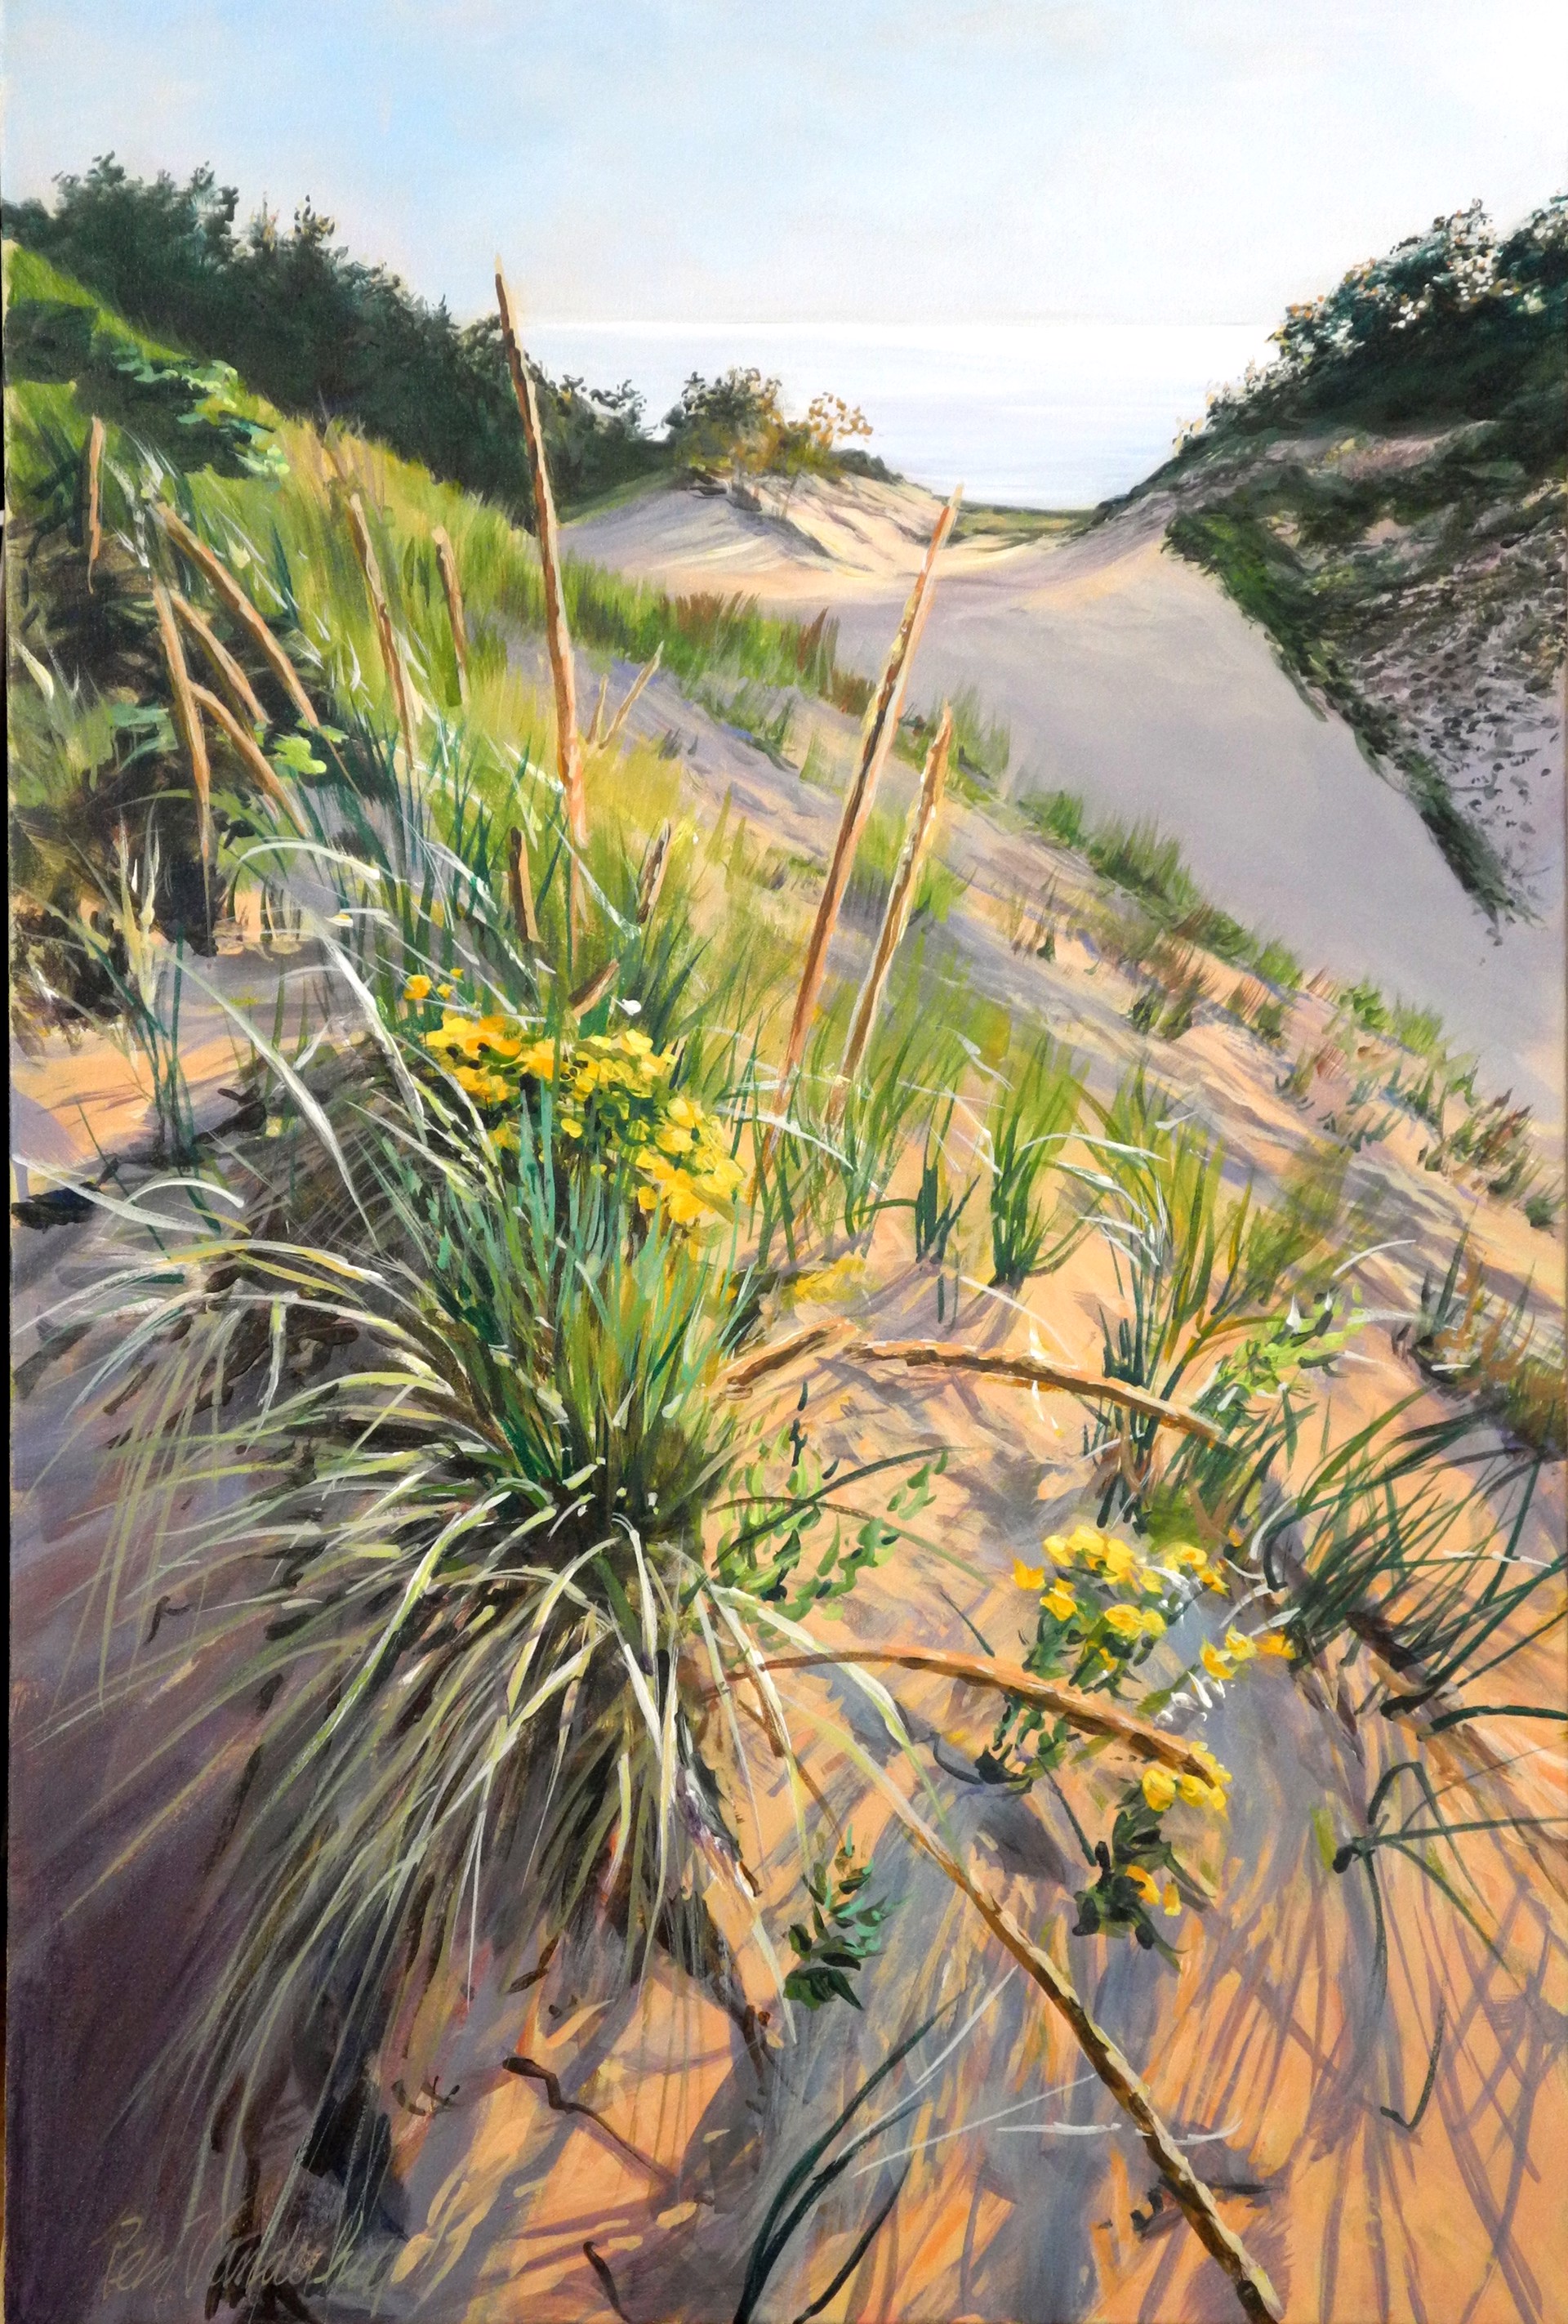 Hoary Puccoon on the Top of the Dune by Rein Vanderhill